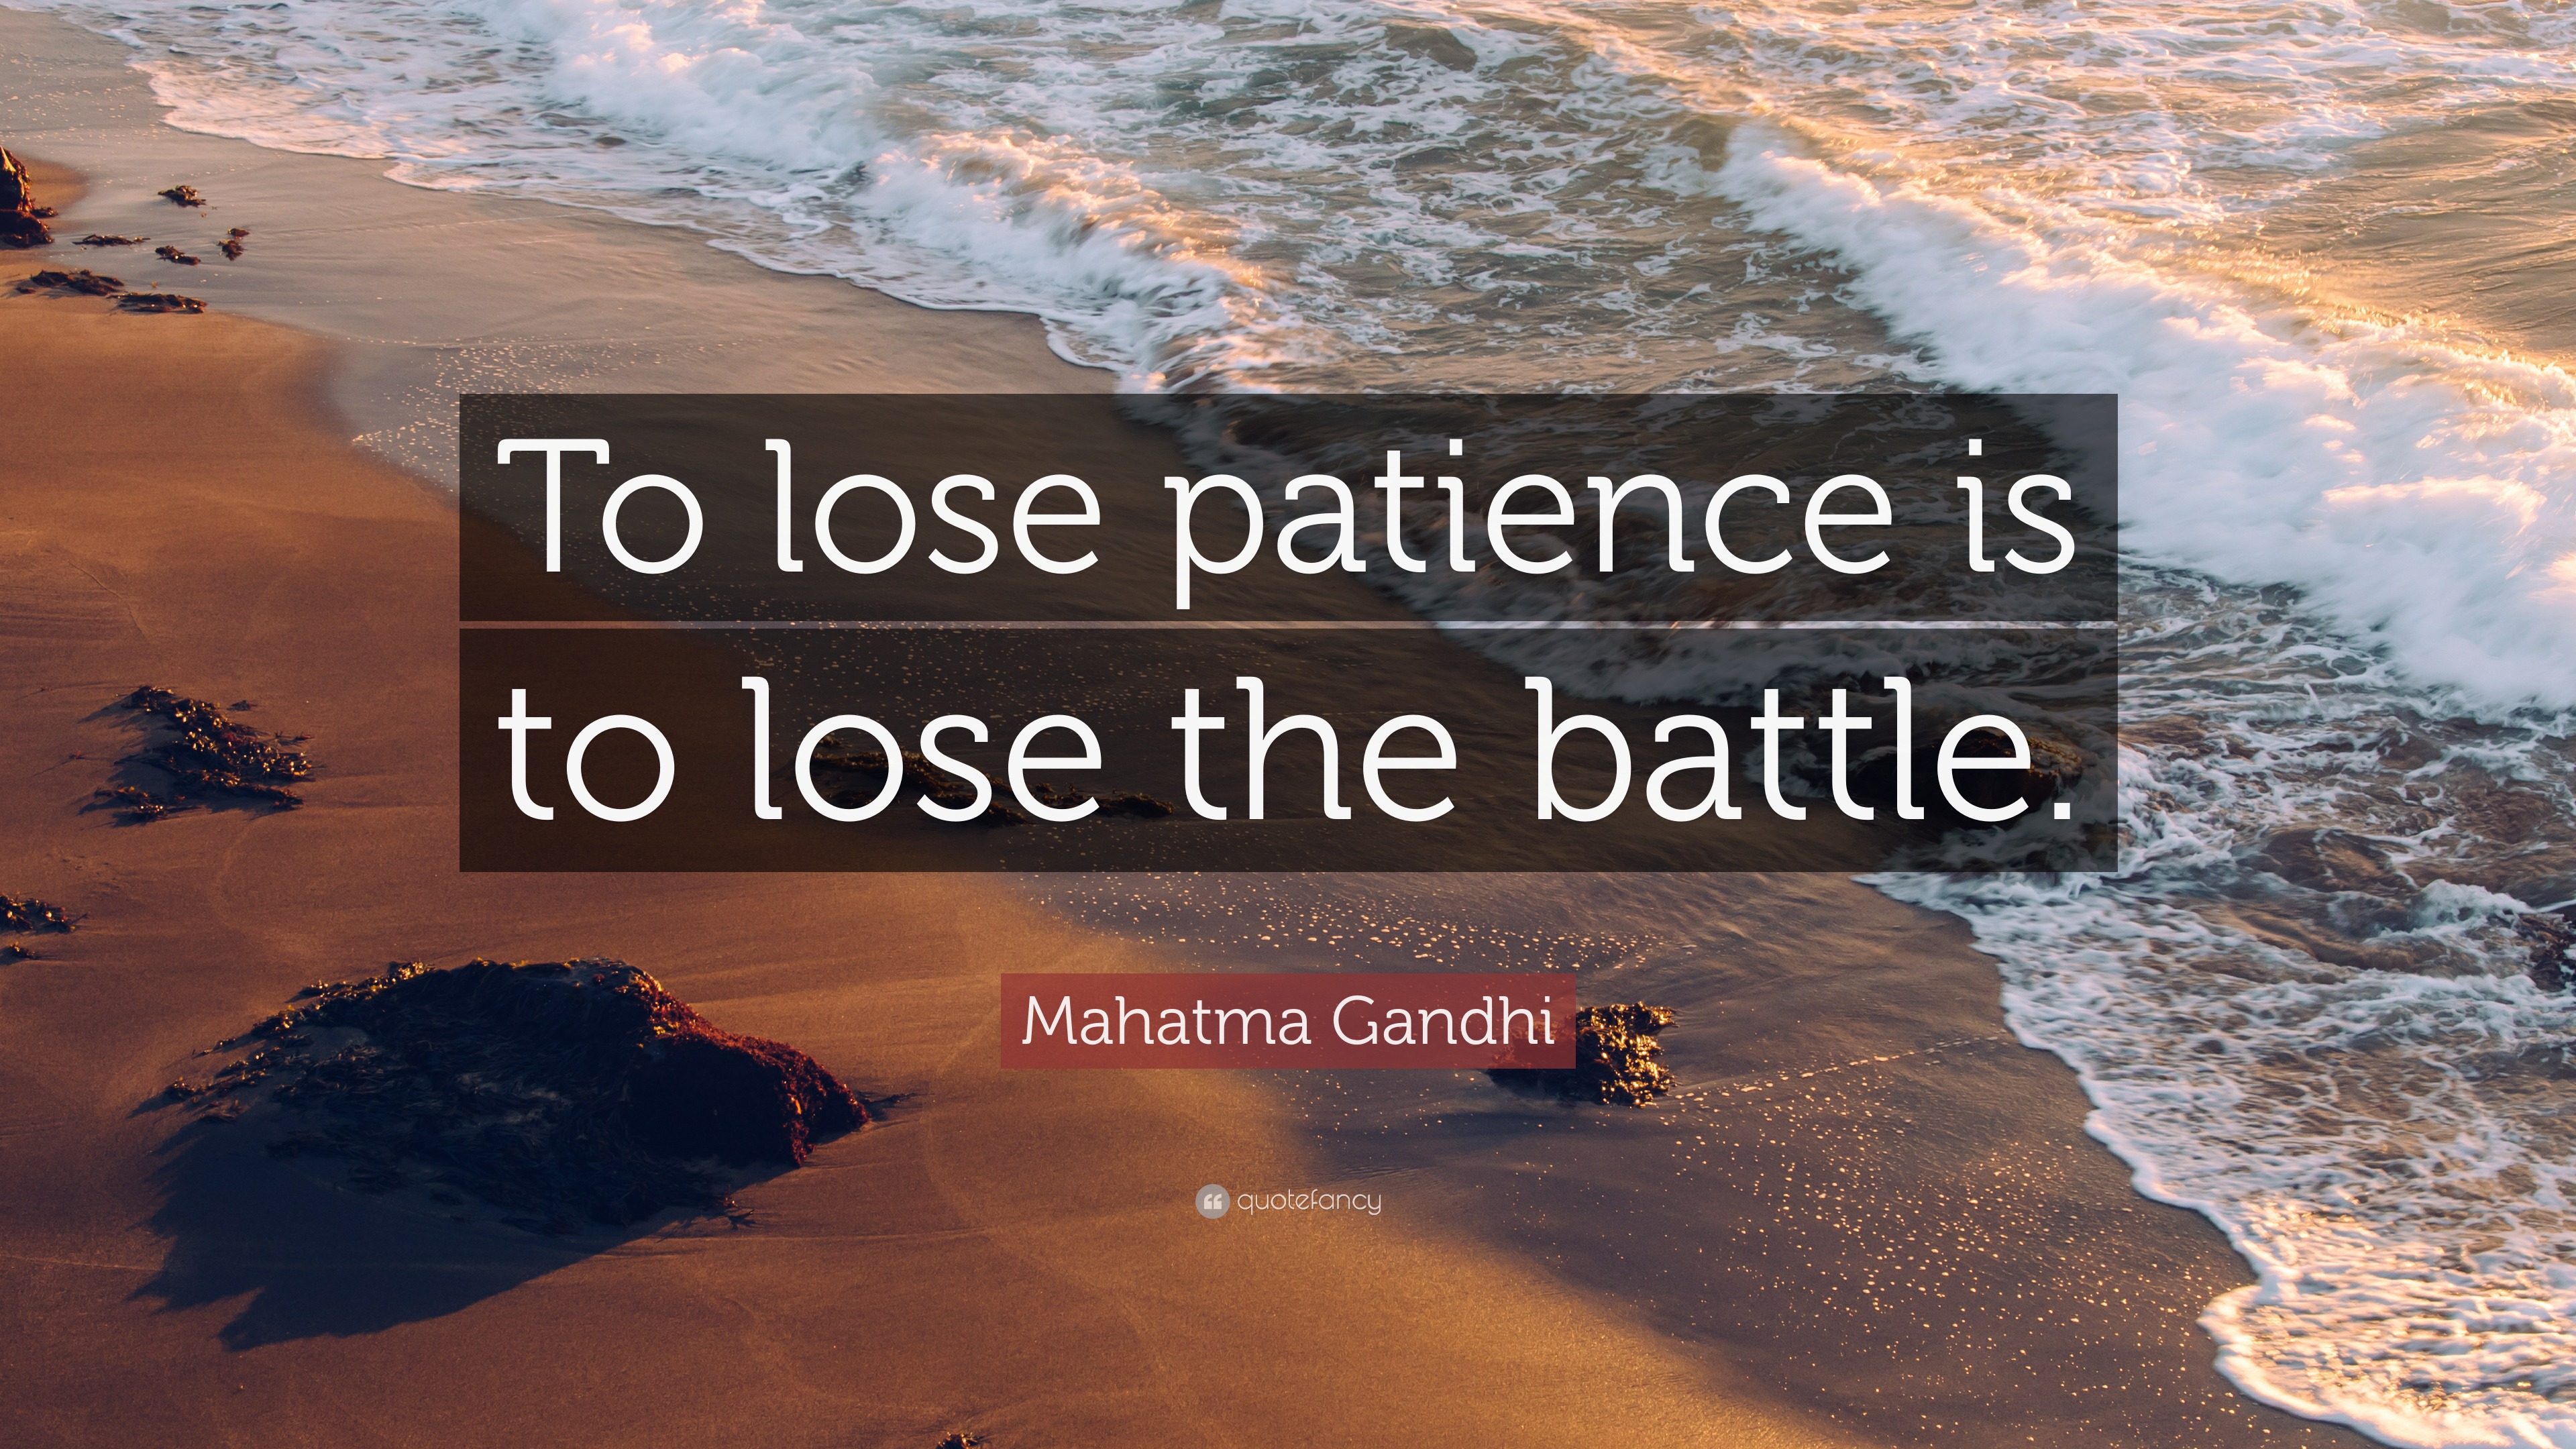 Mahatma Gandhi Quote: “To lose patience is to lose the battle.”